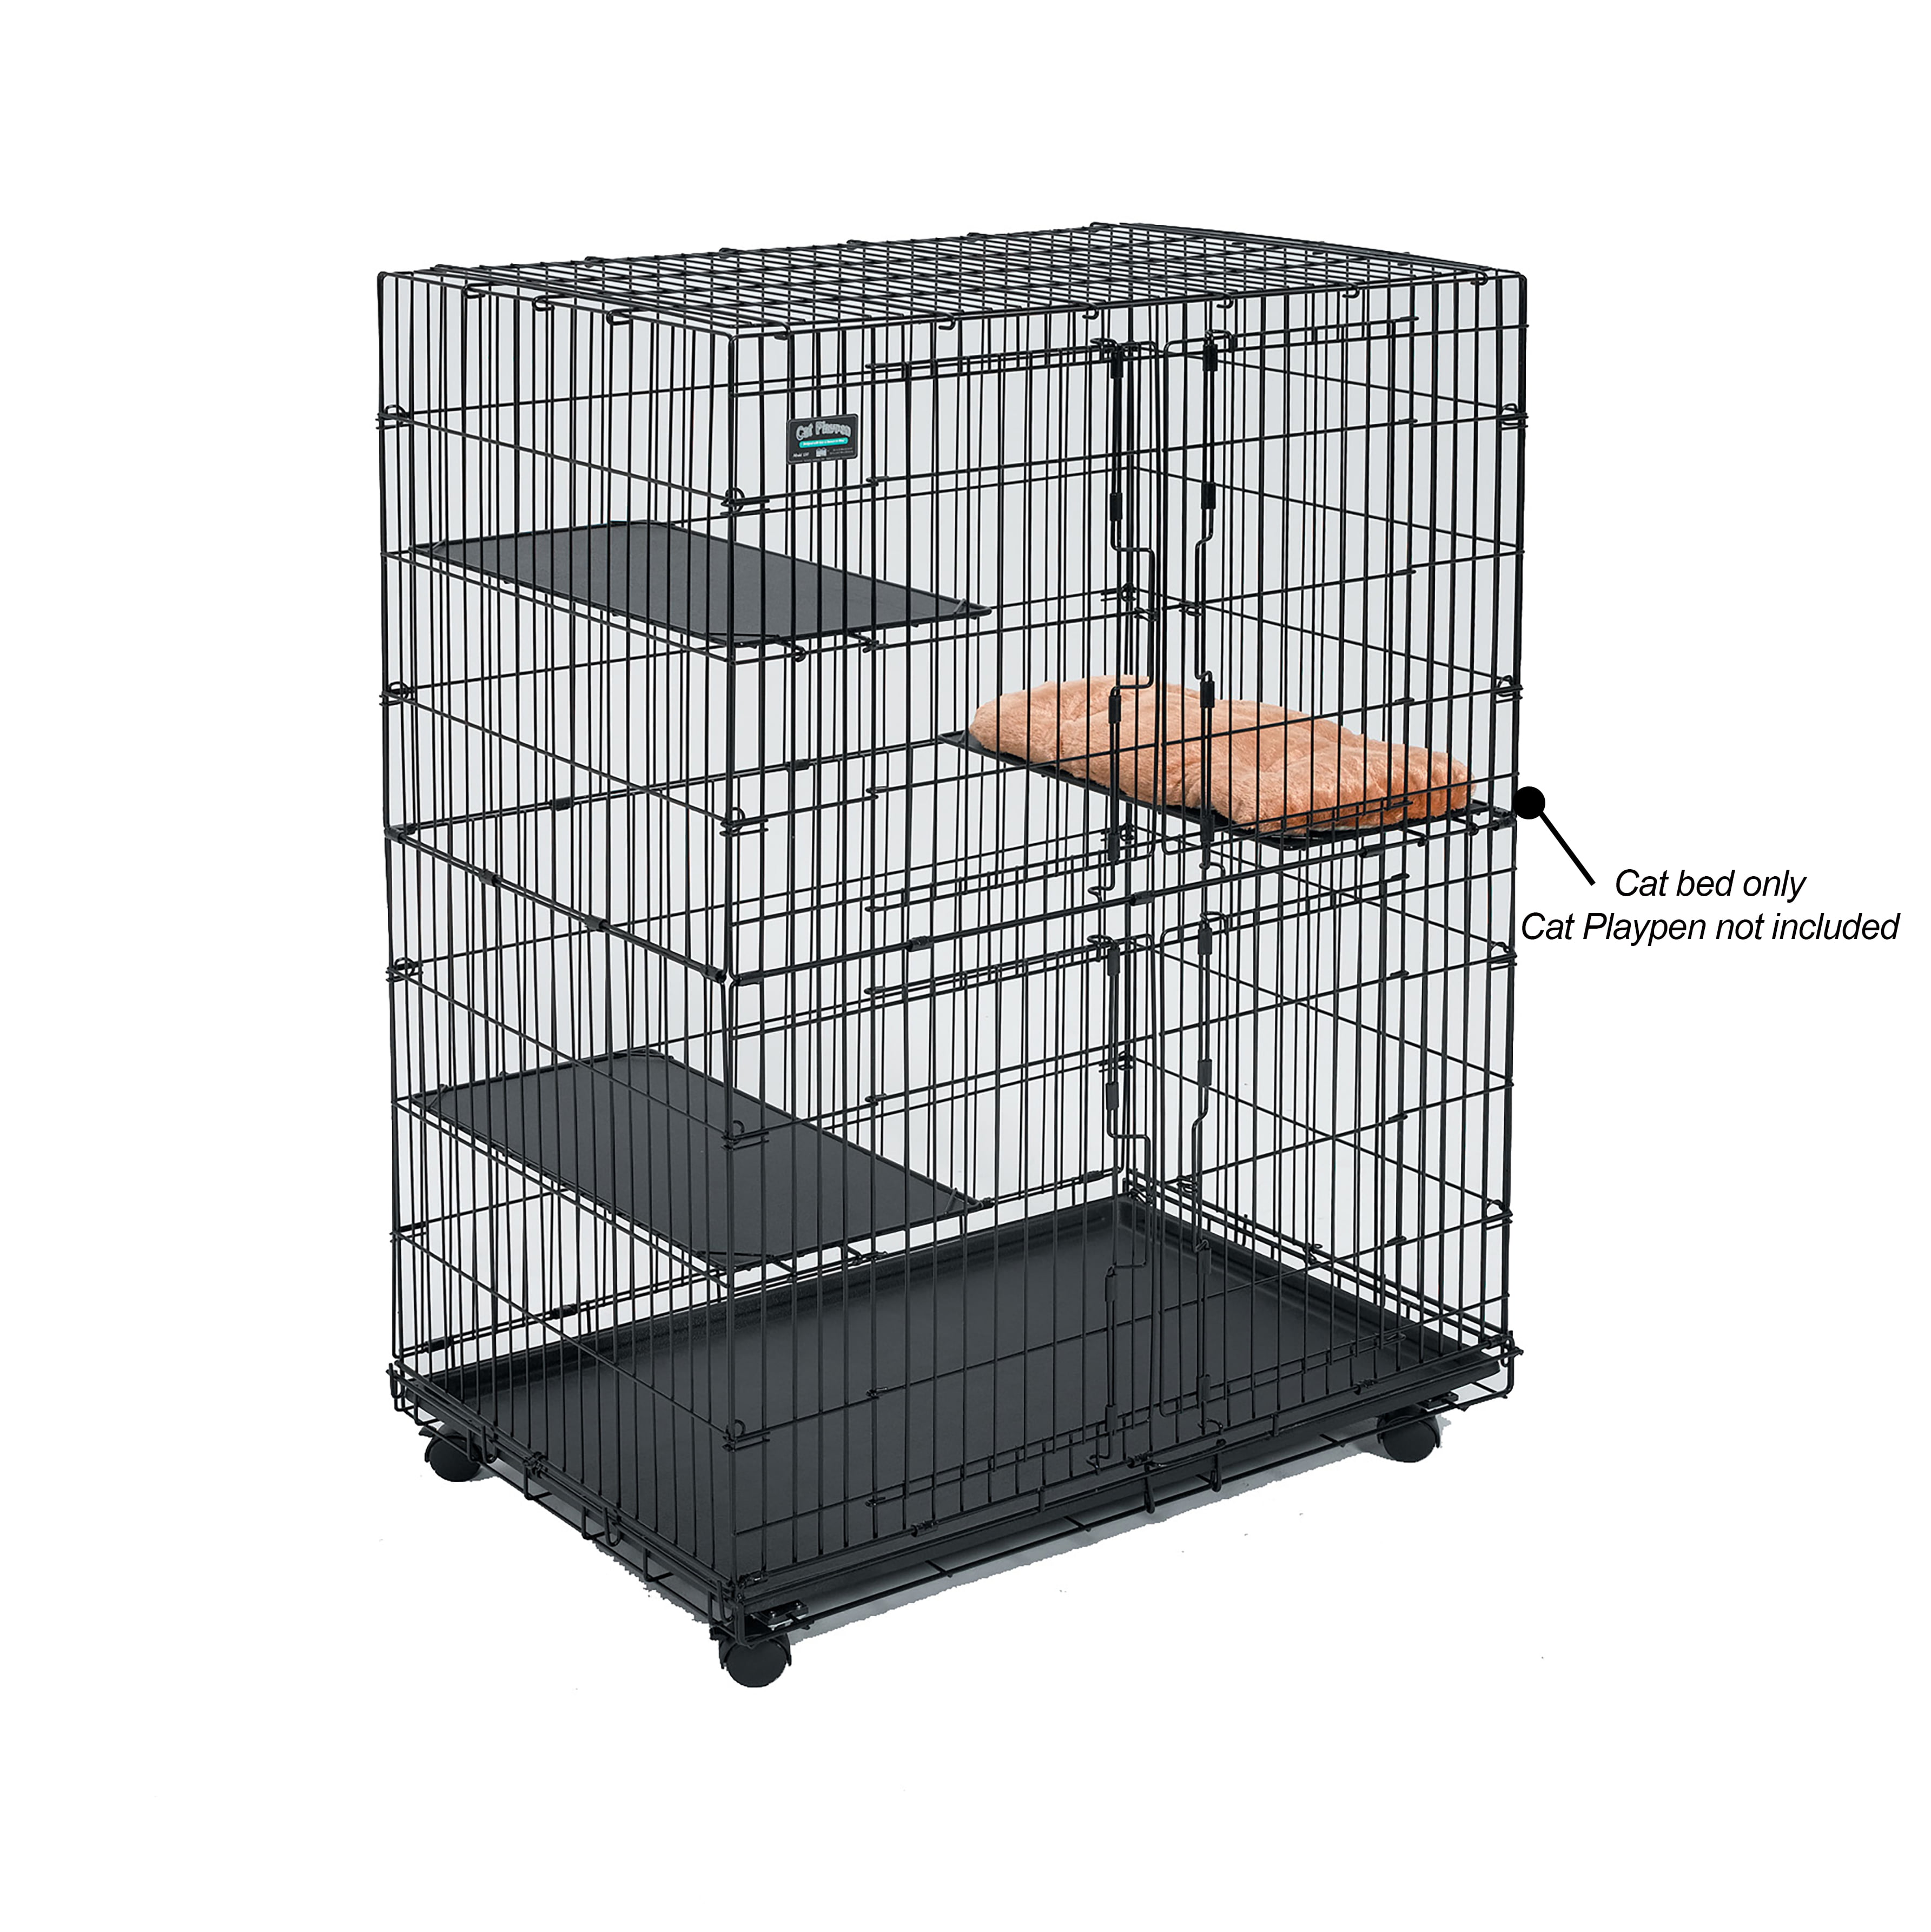 How Long Can a Dog Stay in a Crate? – Impact Dog Crates